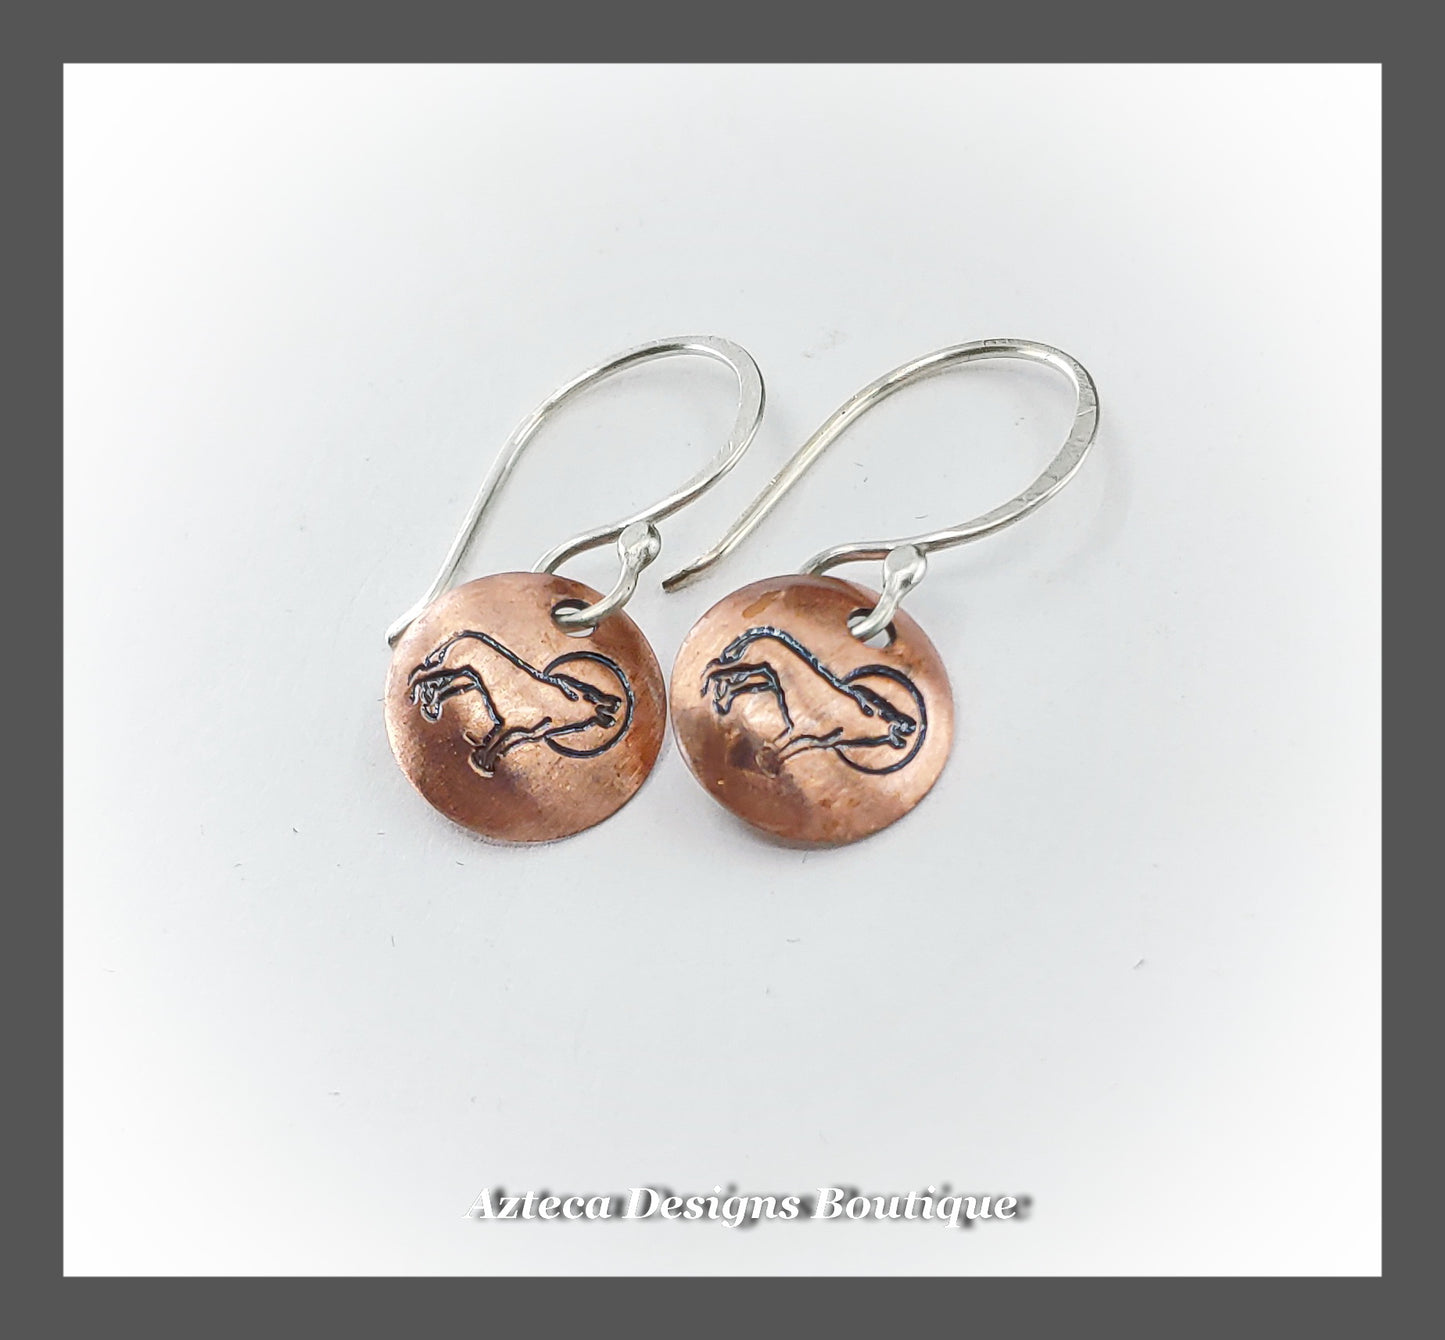 Howling Wolf Hand Fabricated Hand Stamped Copper Silver Charm Earrings